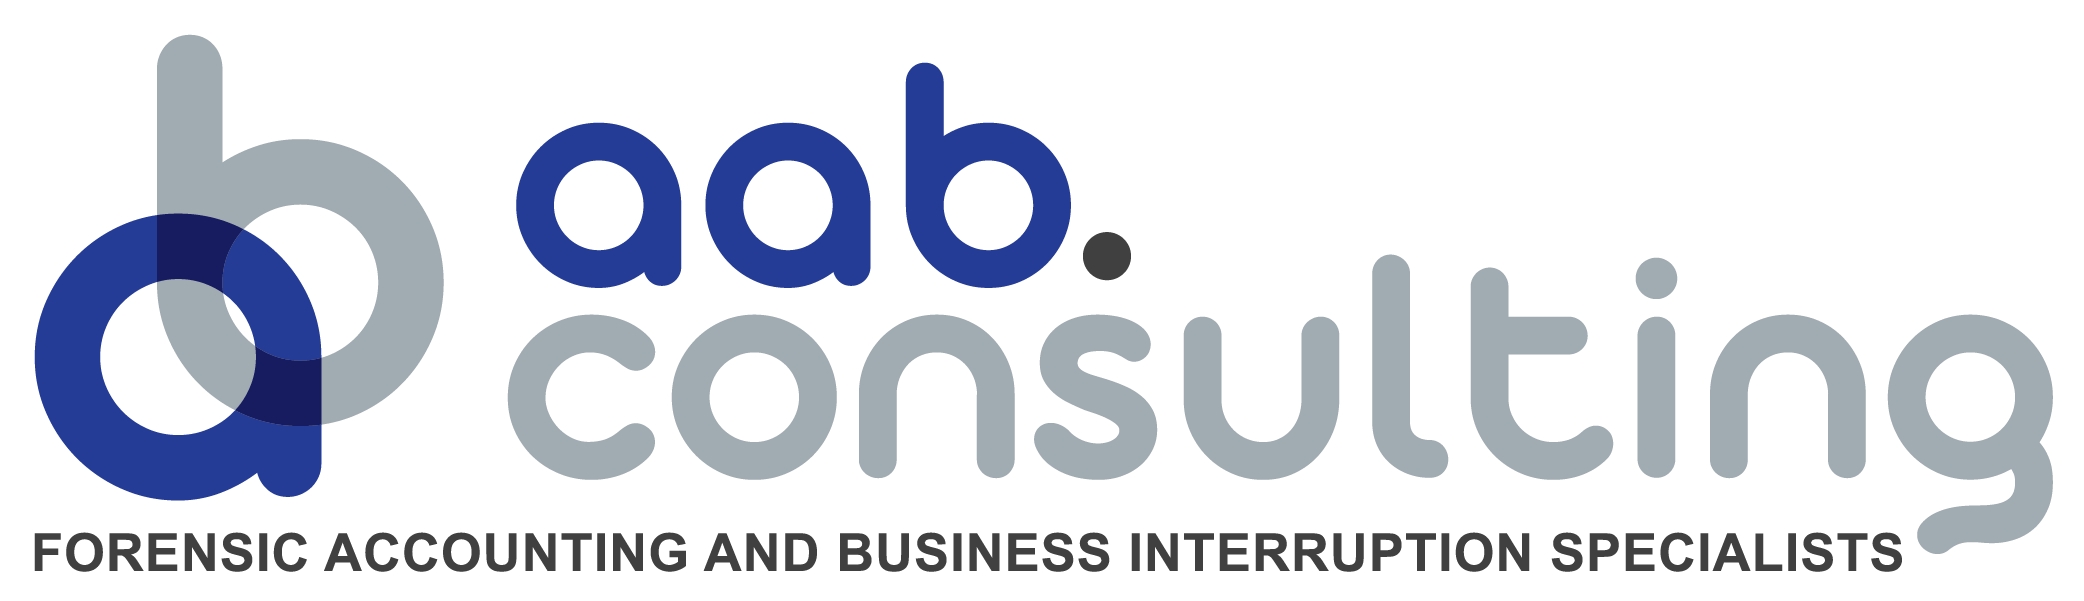 AAB Consulting